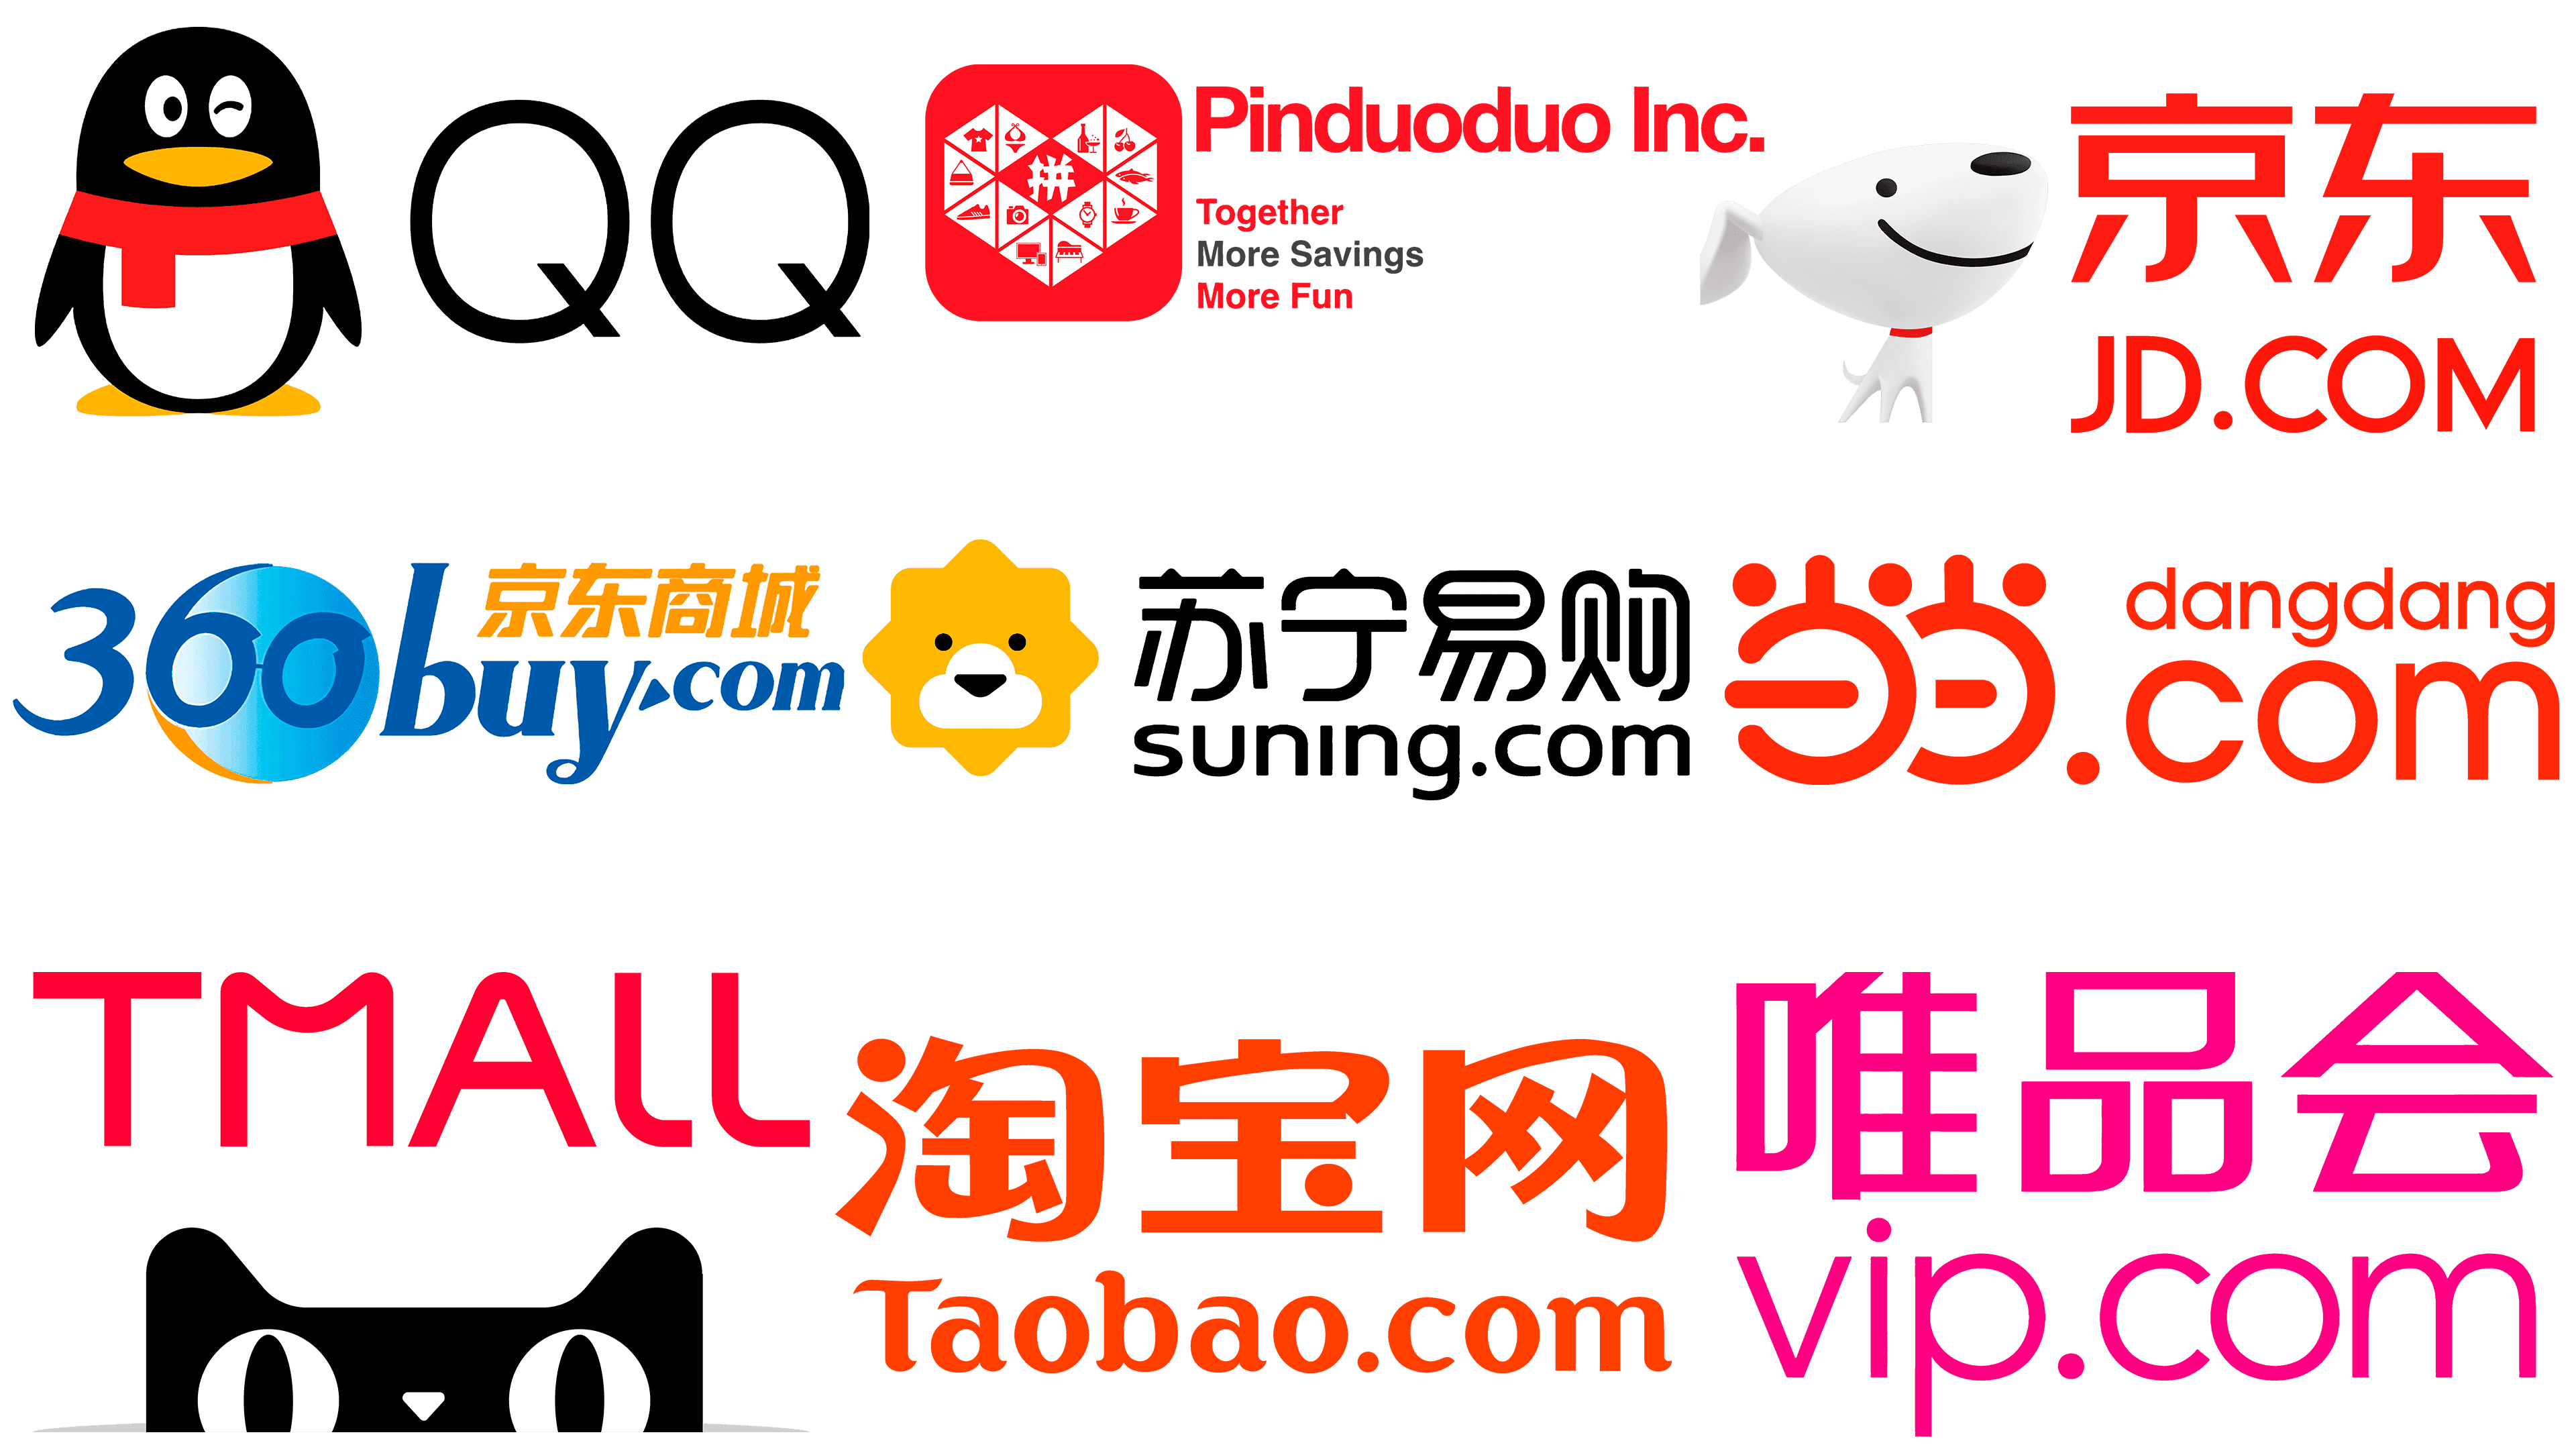 Most famous logos of Chinese shopping sites